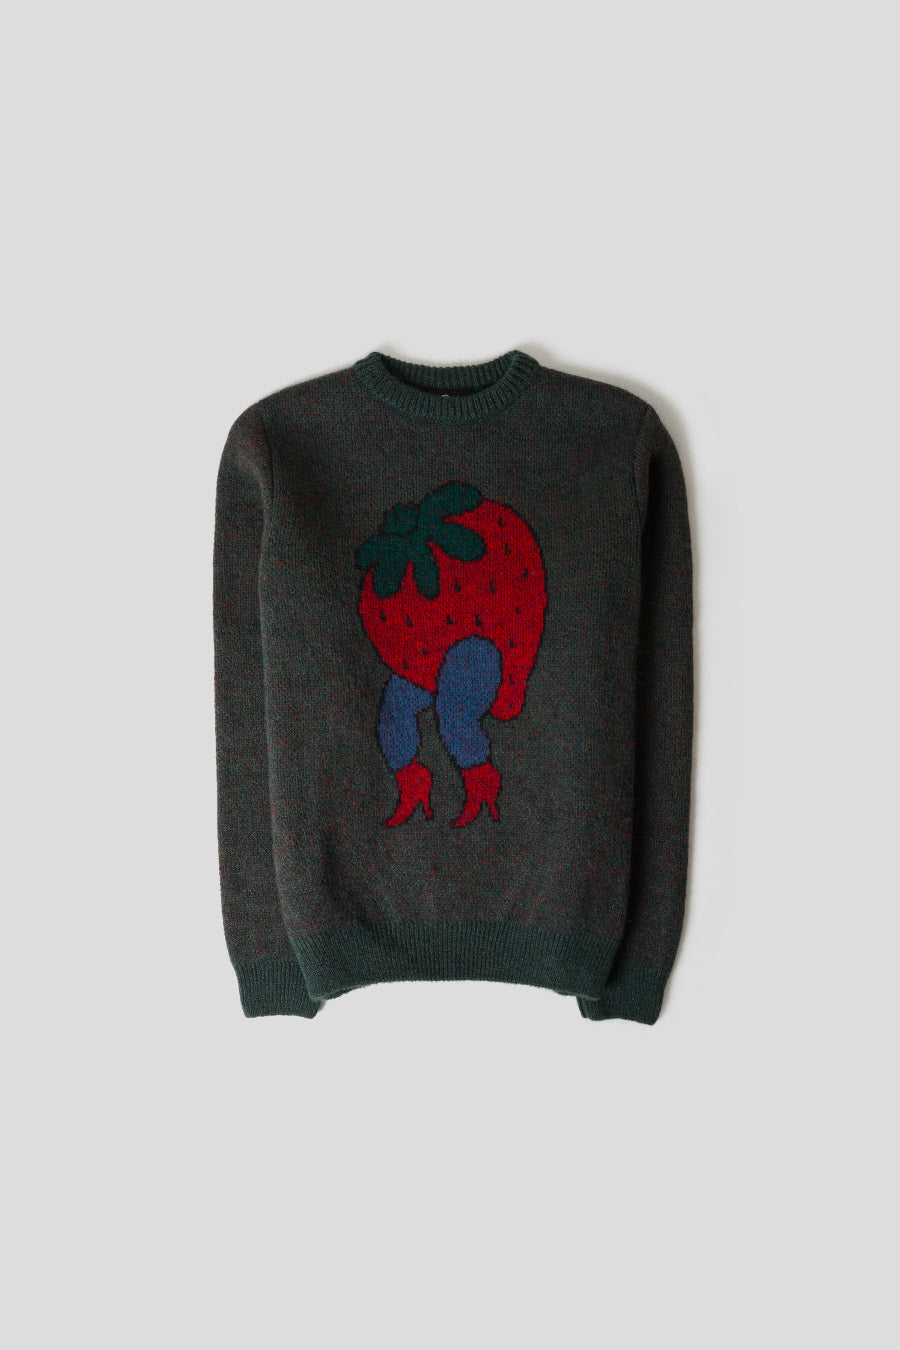 BY PARRA - PULL-OVER STUPID STRAWBERRY VERT - LE LABO STORE